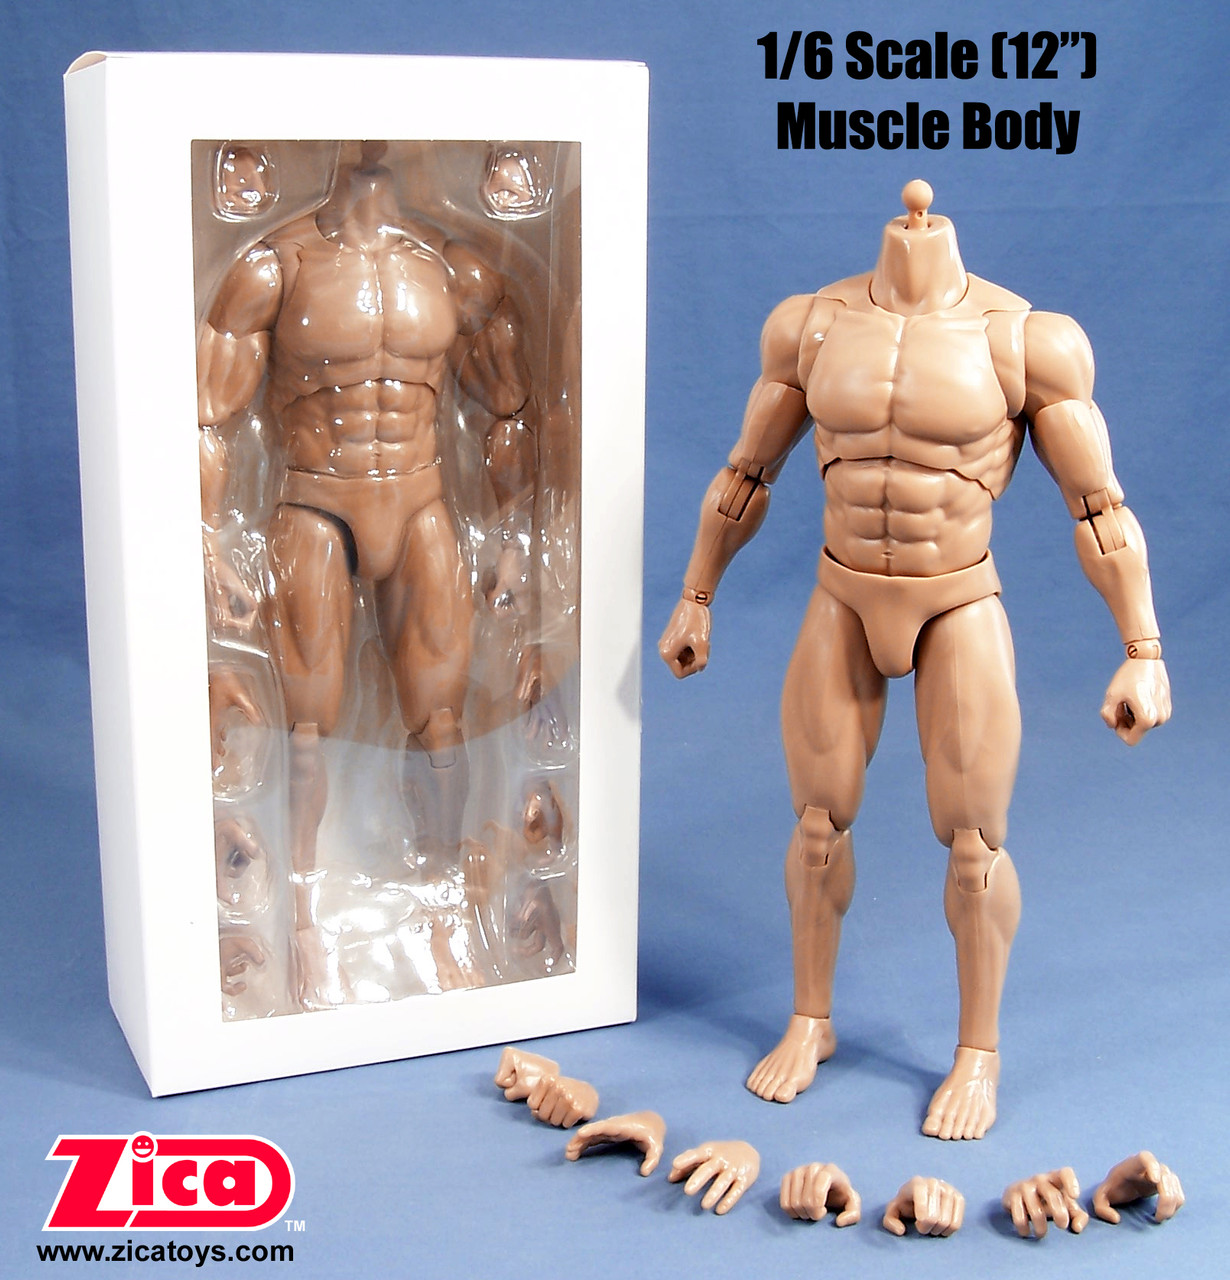 1/6 Scale Male Muscle Body - ZICA Toys Direct